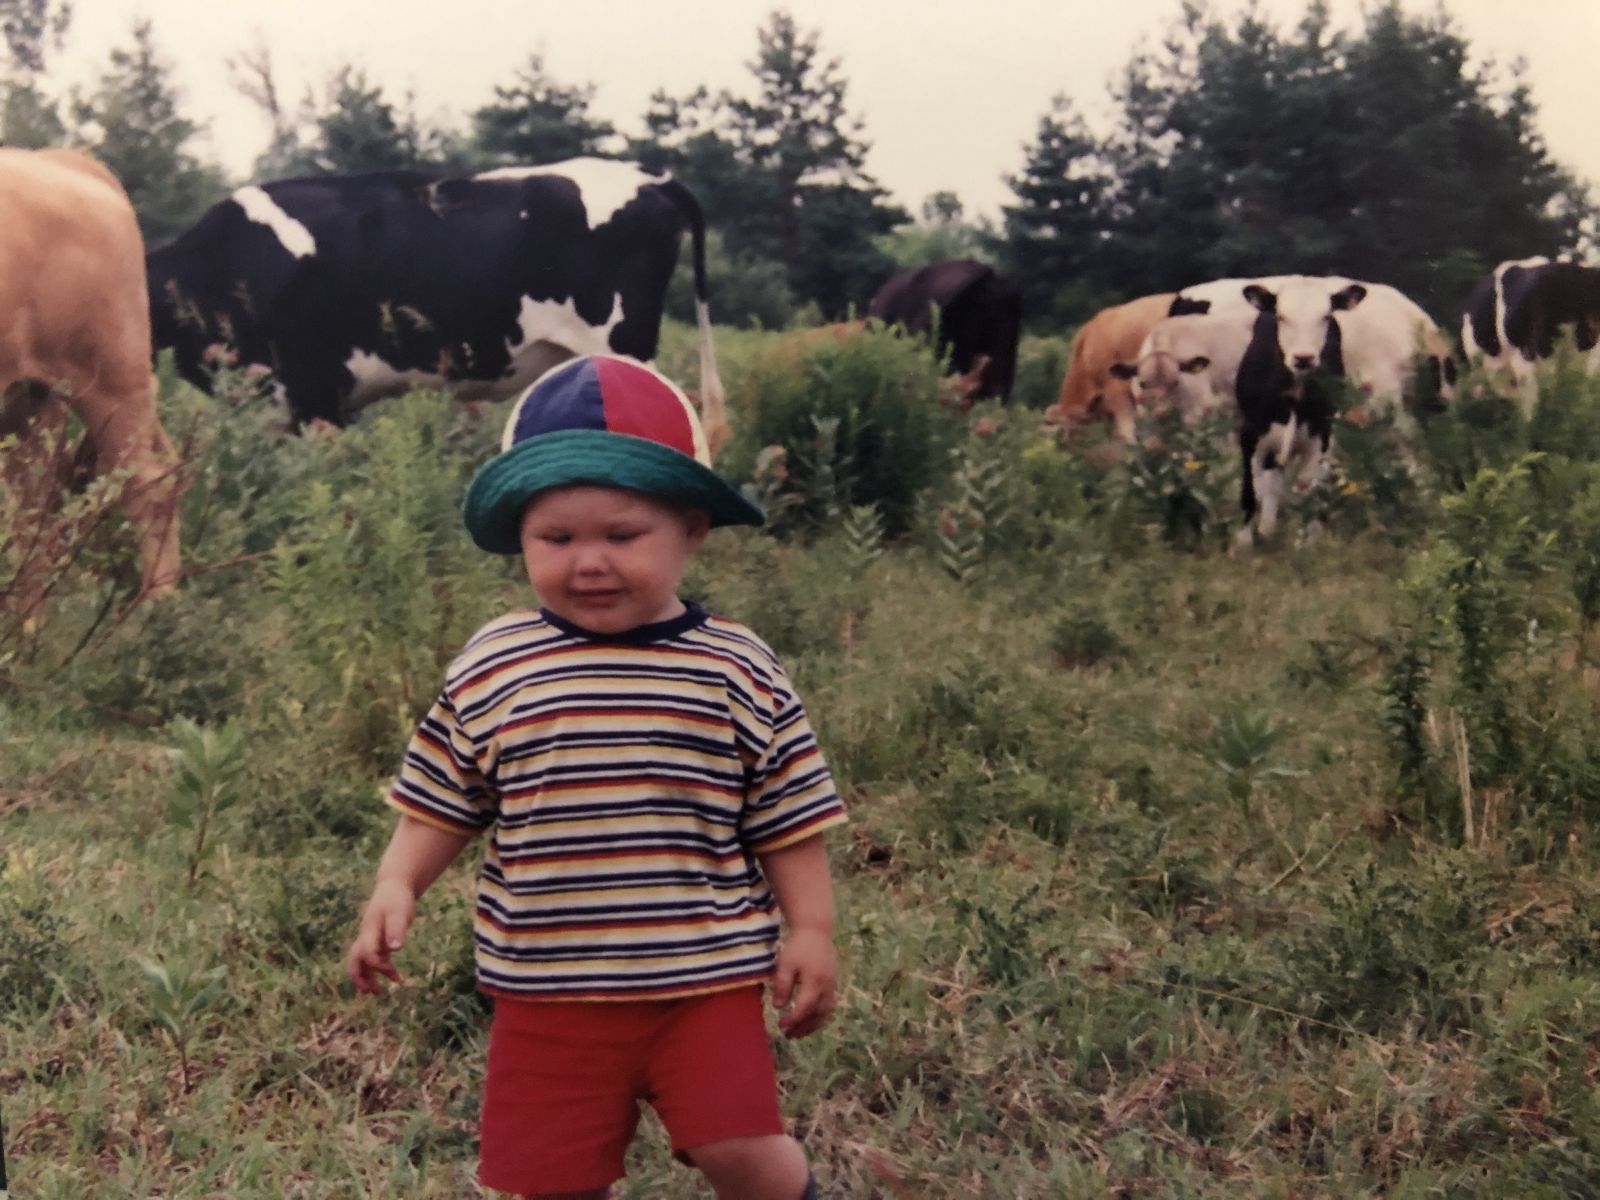 A future student veterinarian in the field with cows